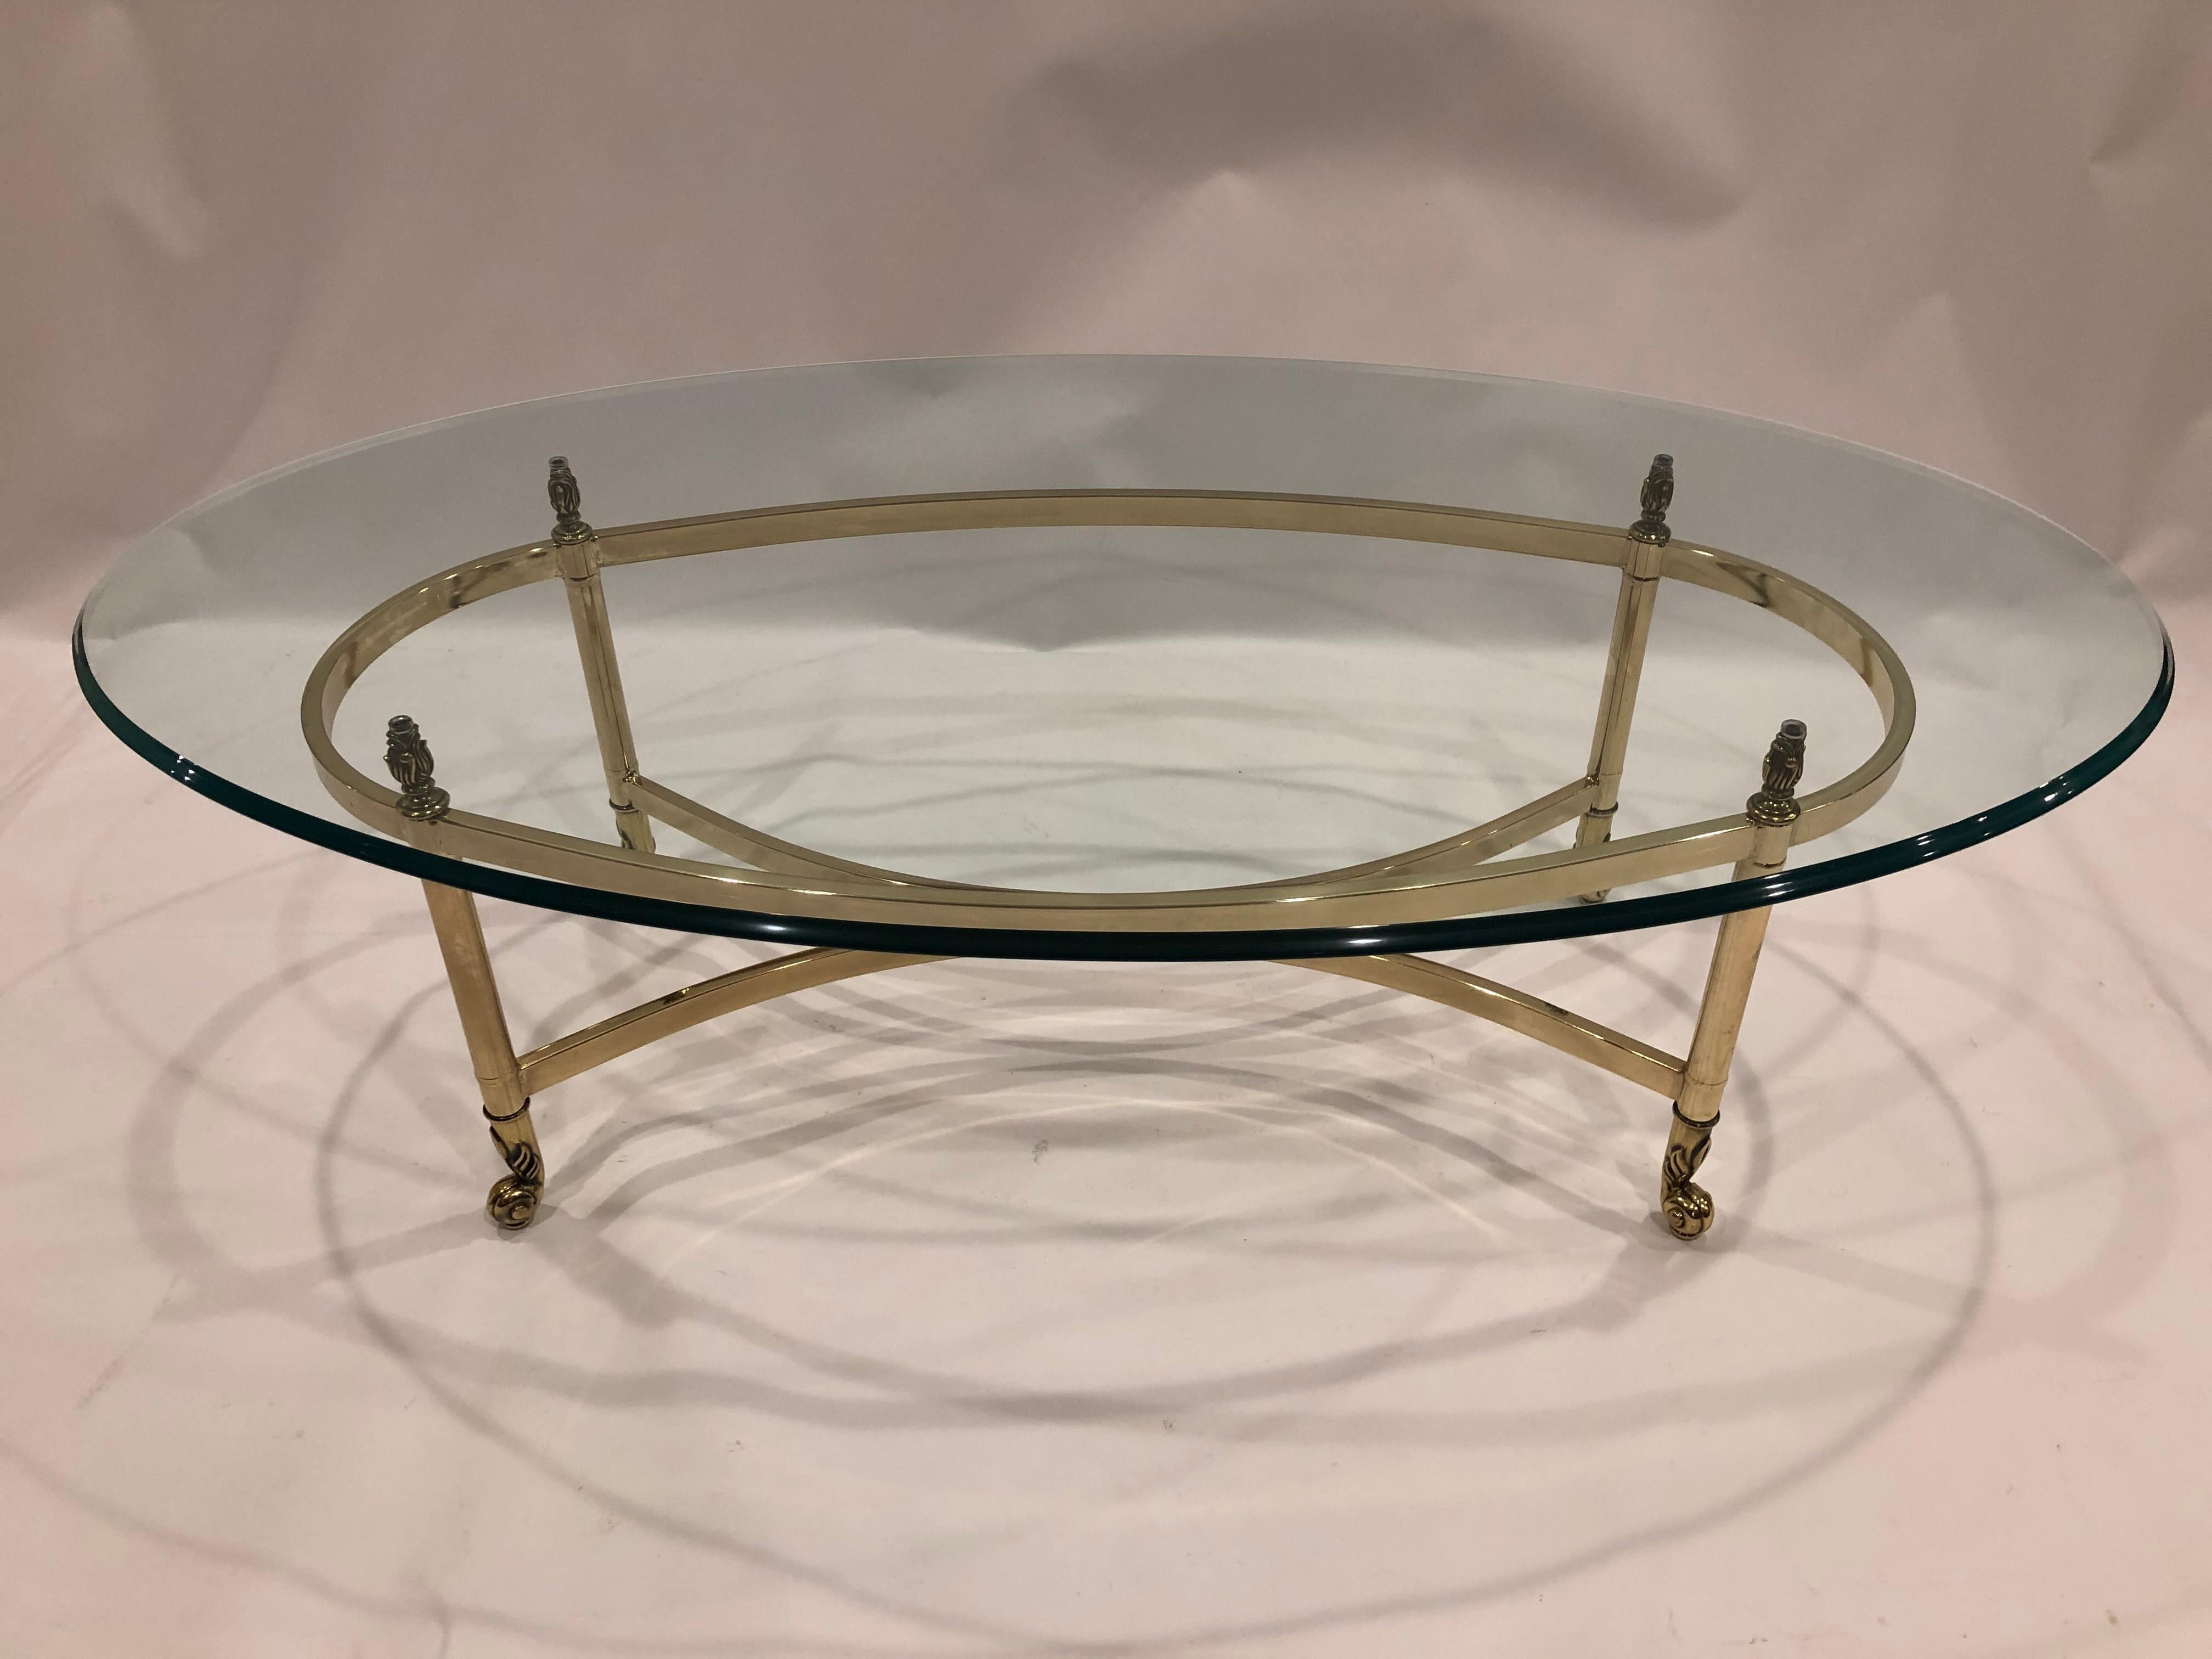 Timeless and elegant oval sleek coffee table by La Barge having lovely brass base and glass top.
Measures: Base is 40 W 19.75 D 16.25 H.